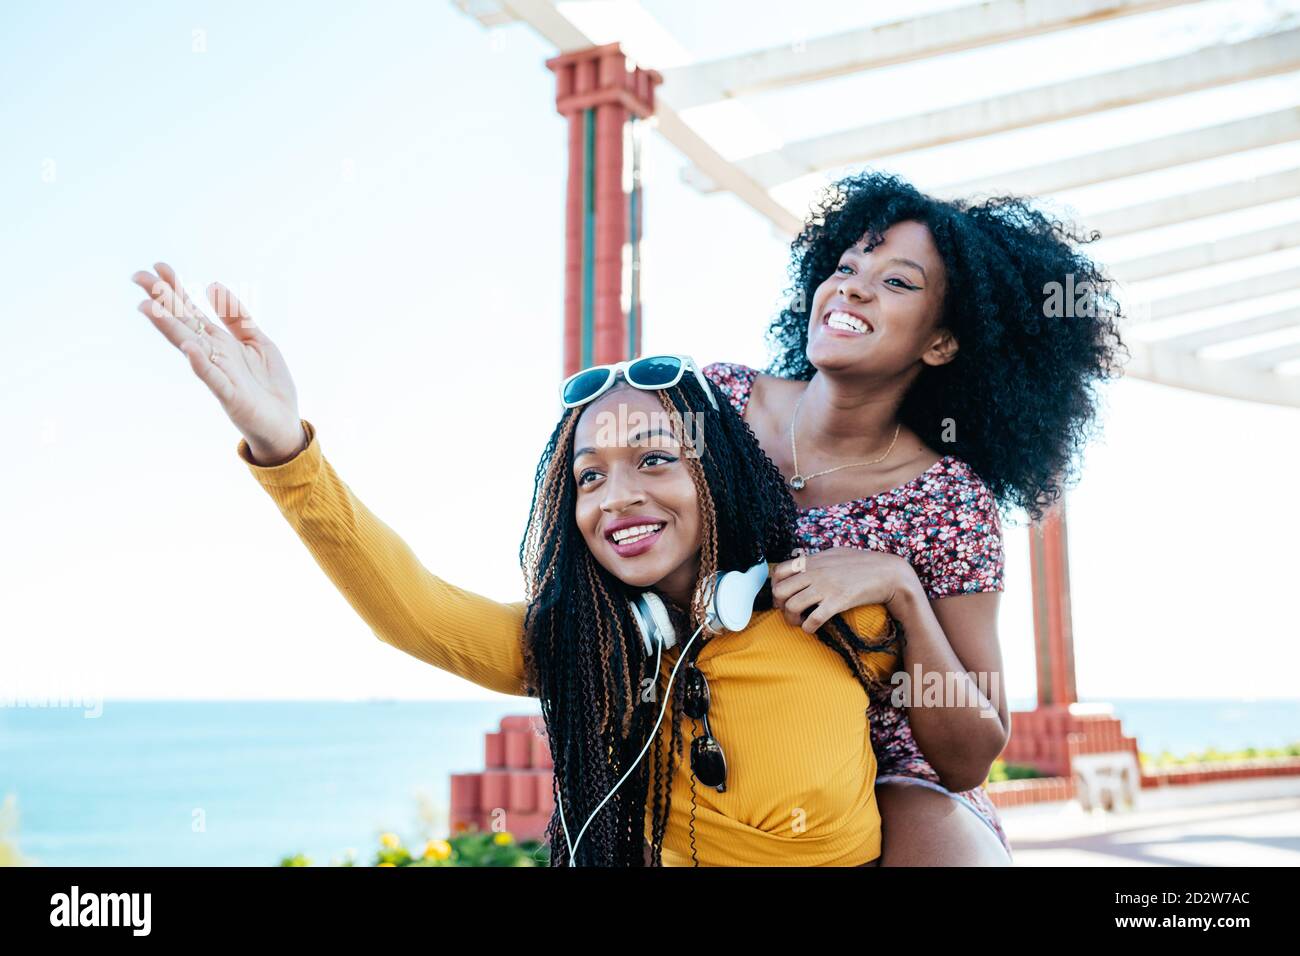 Cheerful ethnic Woman with curly hair piggybacking delighted female friend with braids while having fun on promenade at weekend in summer Stock Photo